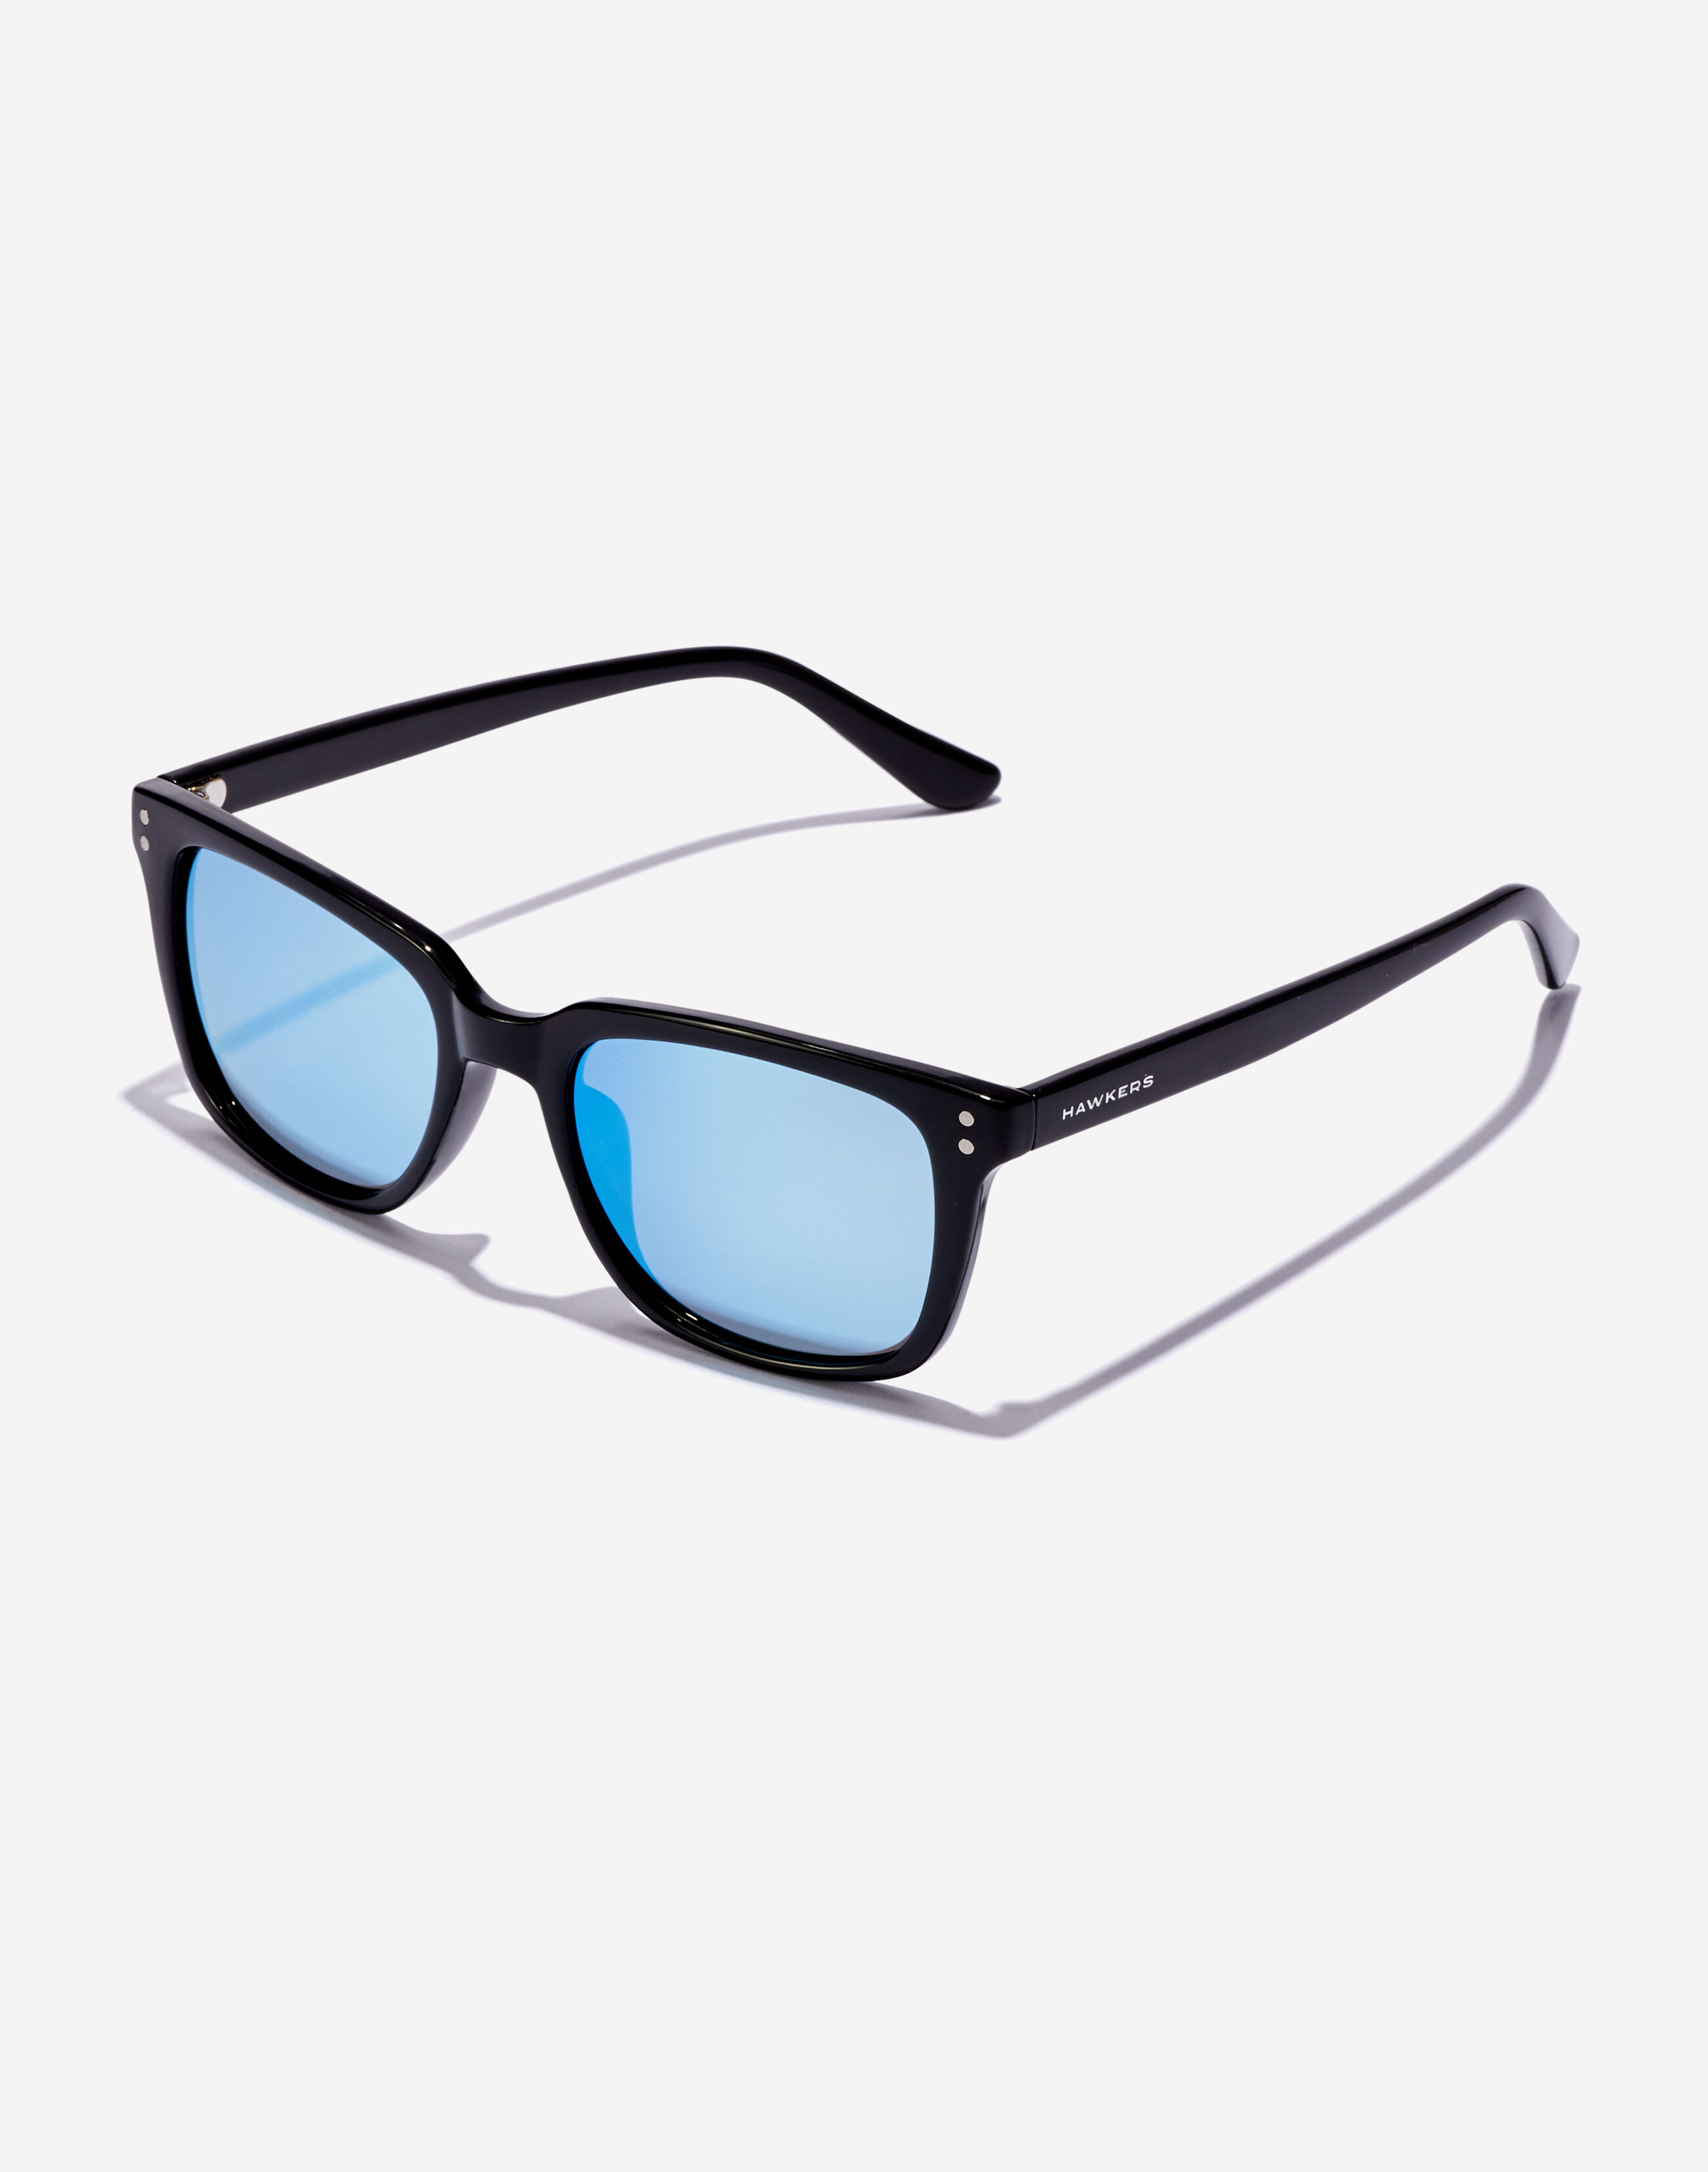 Buy Unisex Polarized Sunglasses Online | Hawkers USA® Official Store